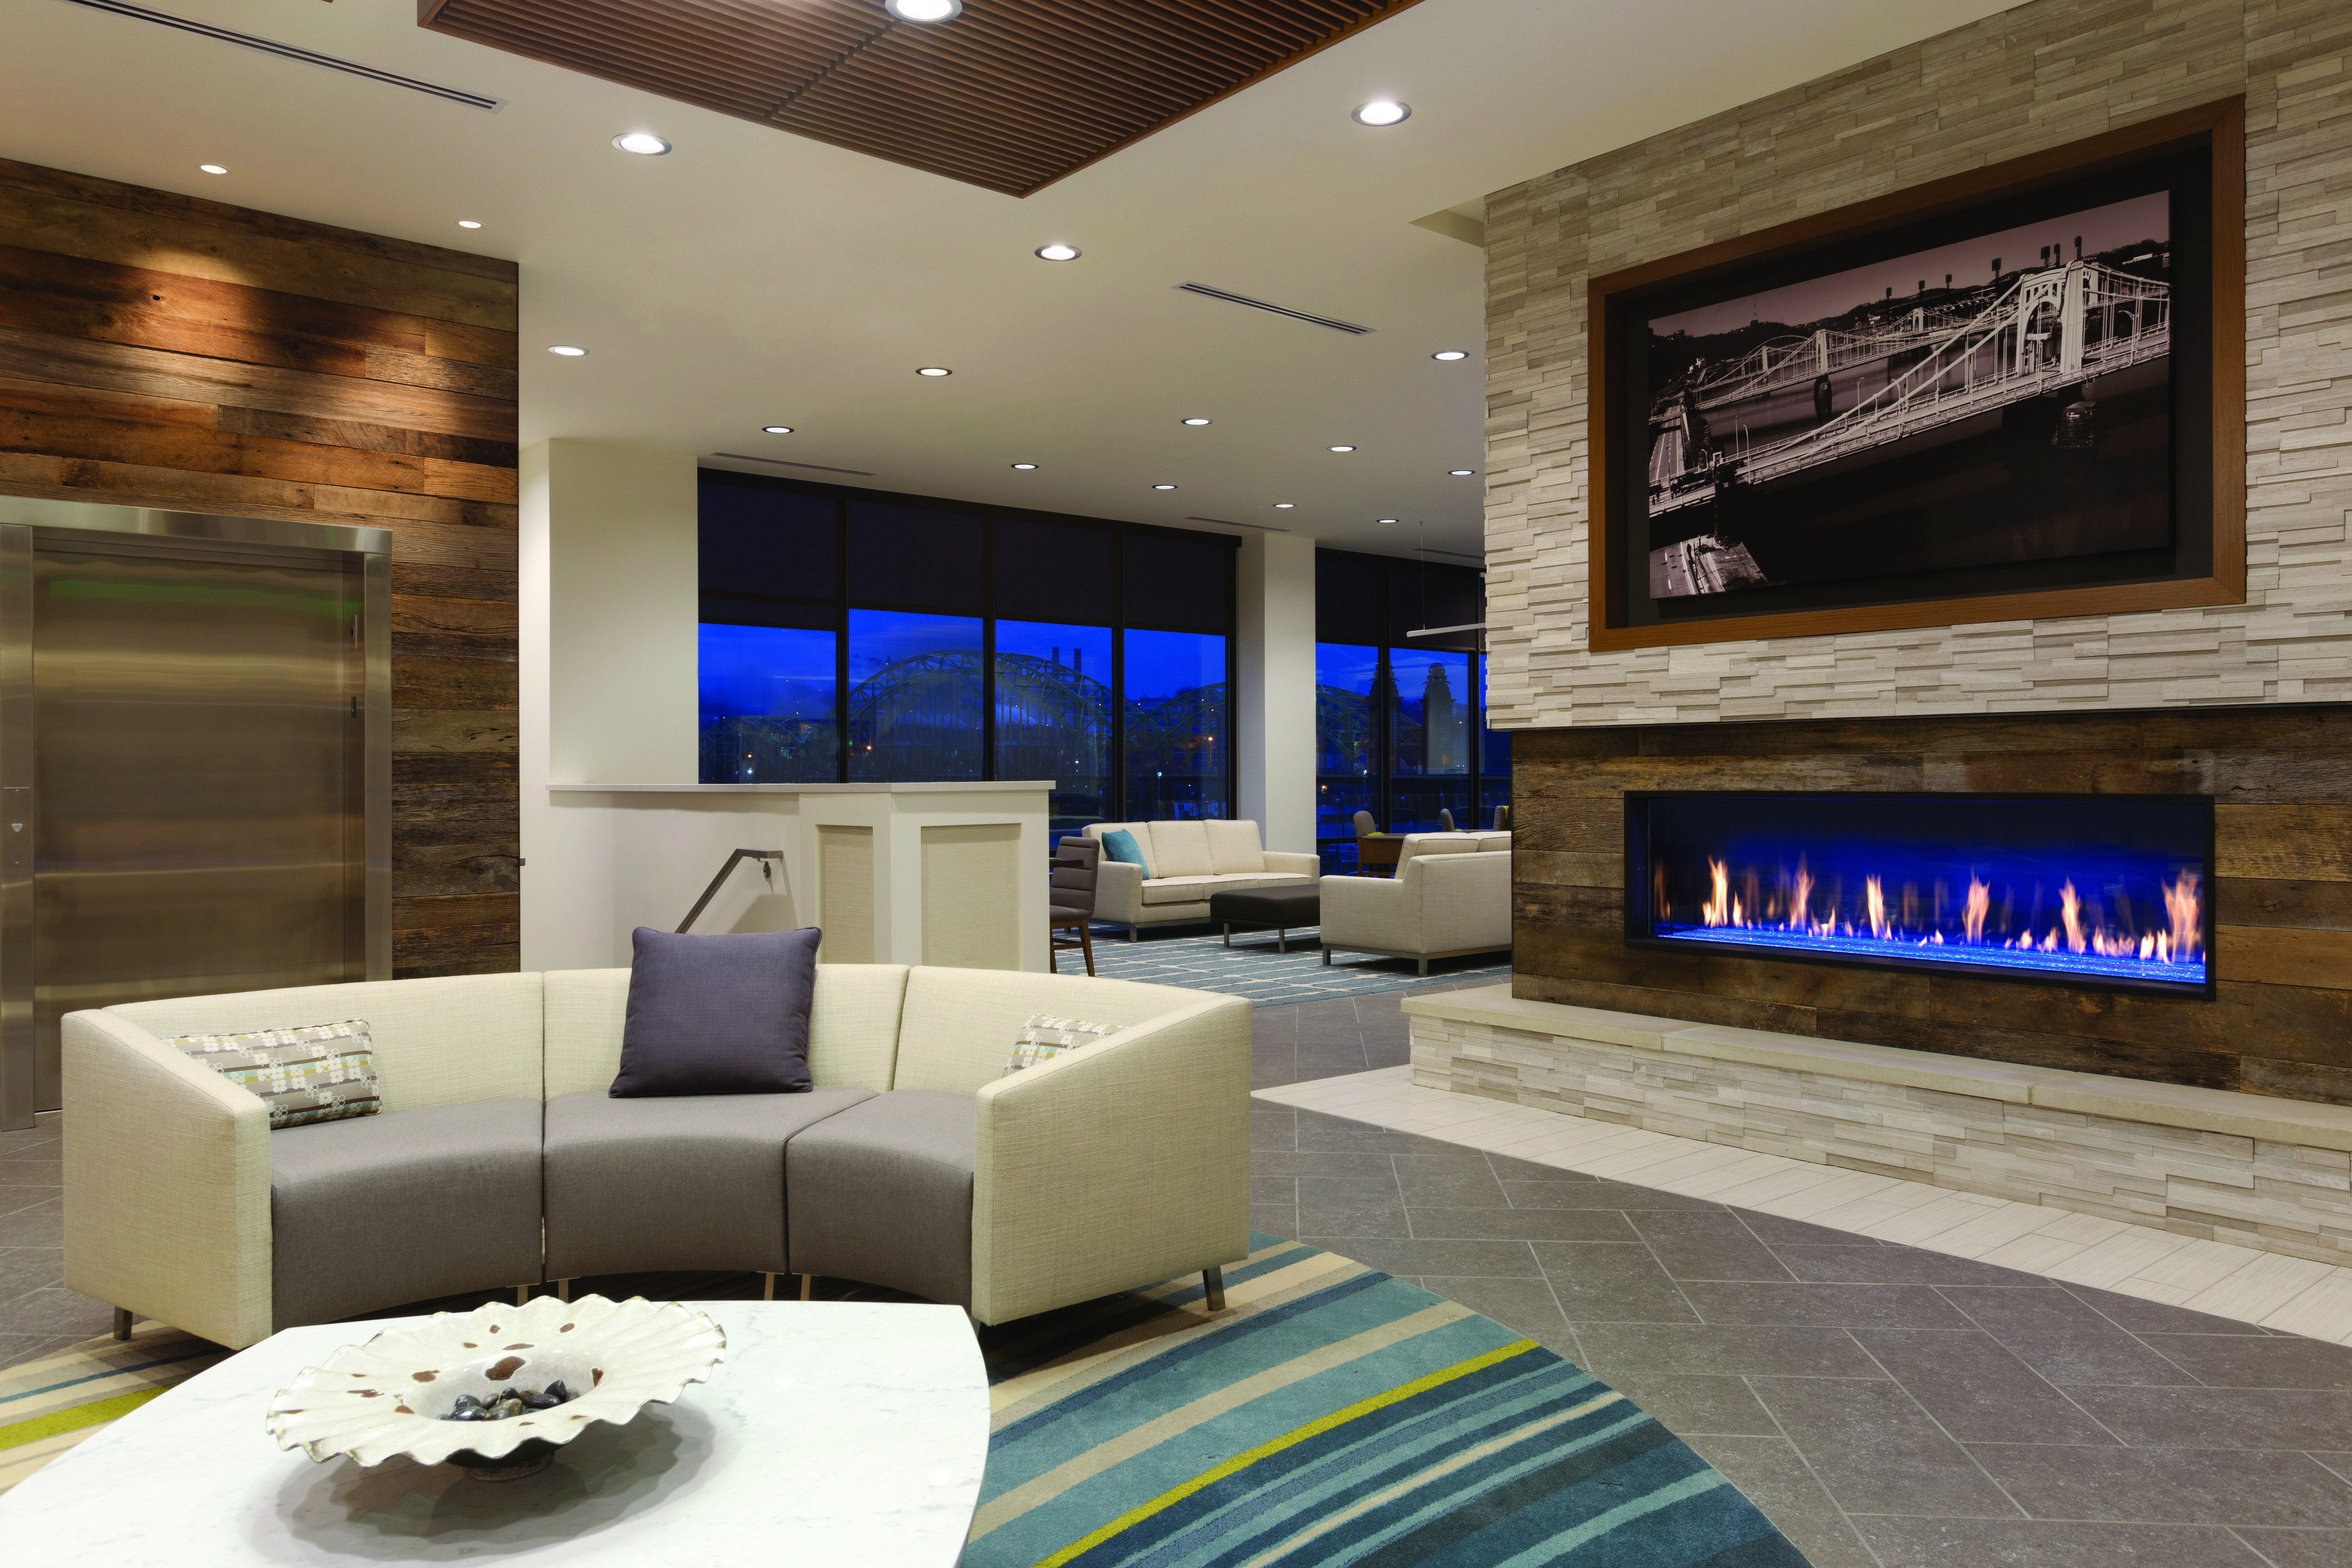 Lobby seating area with curved sofa, coffee table, and fireplace with art displayed above